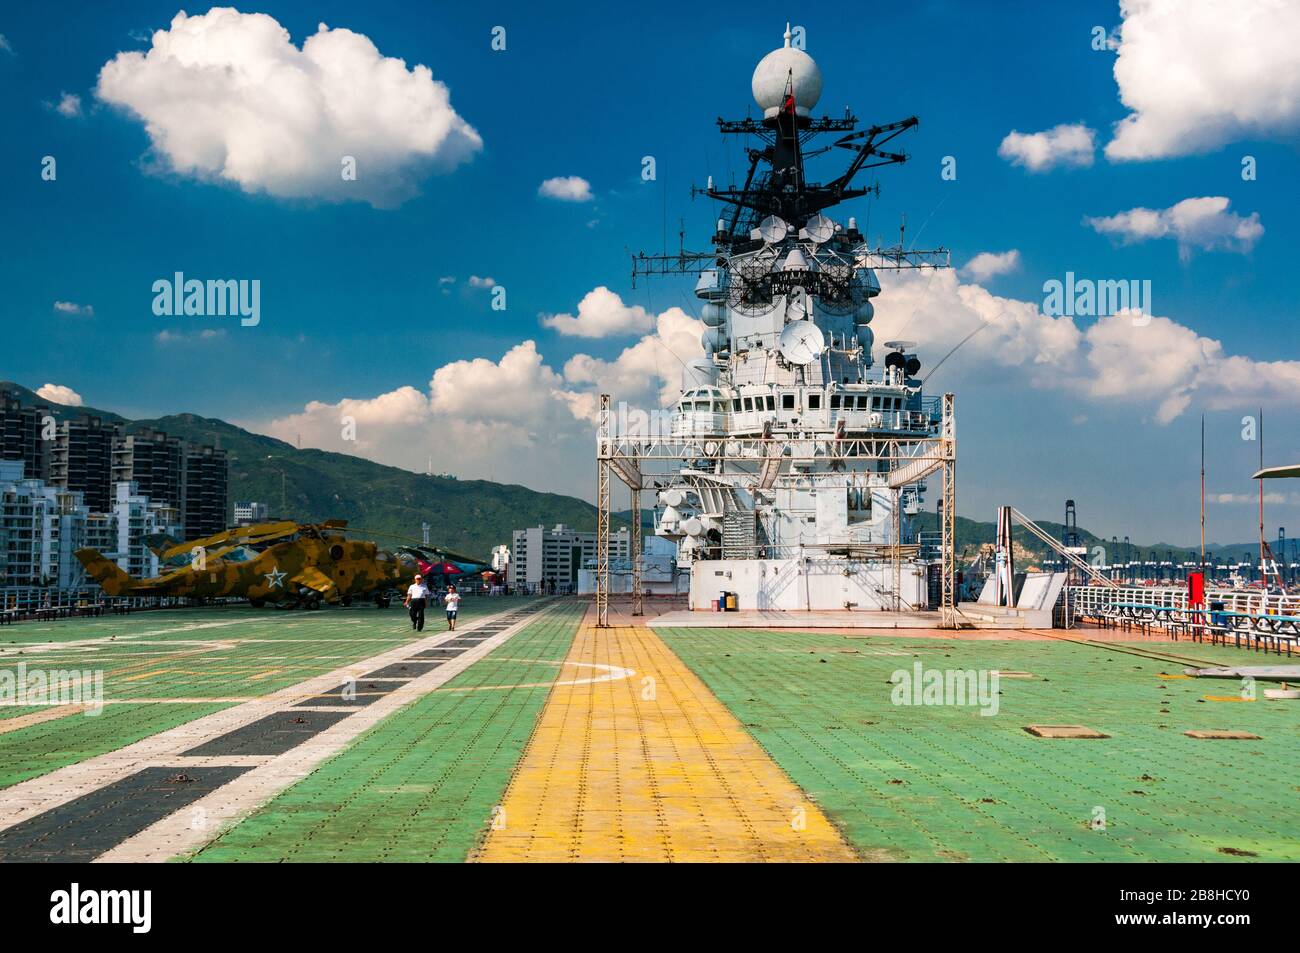 View of the flight deck of Minsk  an old Soviet aircraft carrier in use as a military theme park in Yantian, Shenzhen, China. Stock Photo